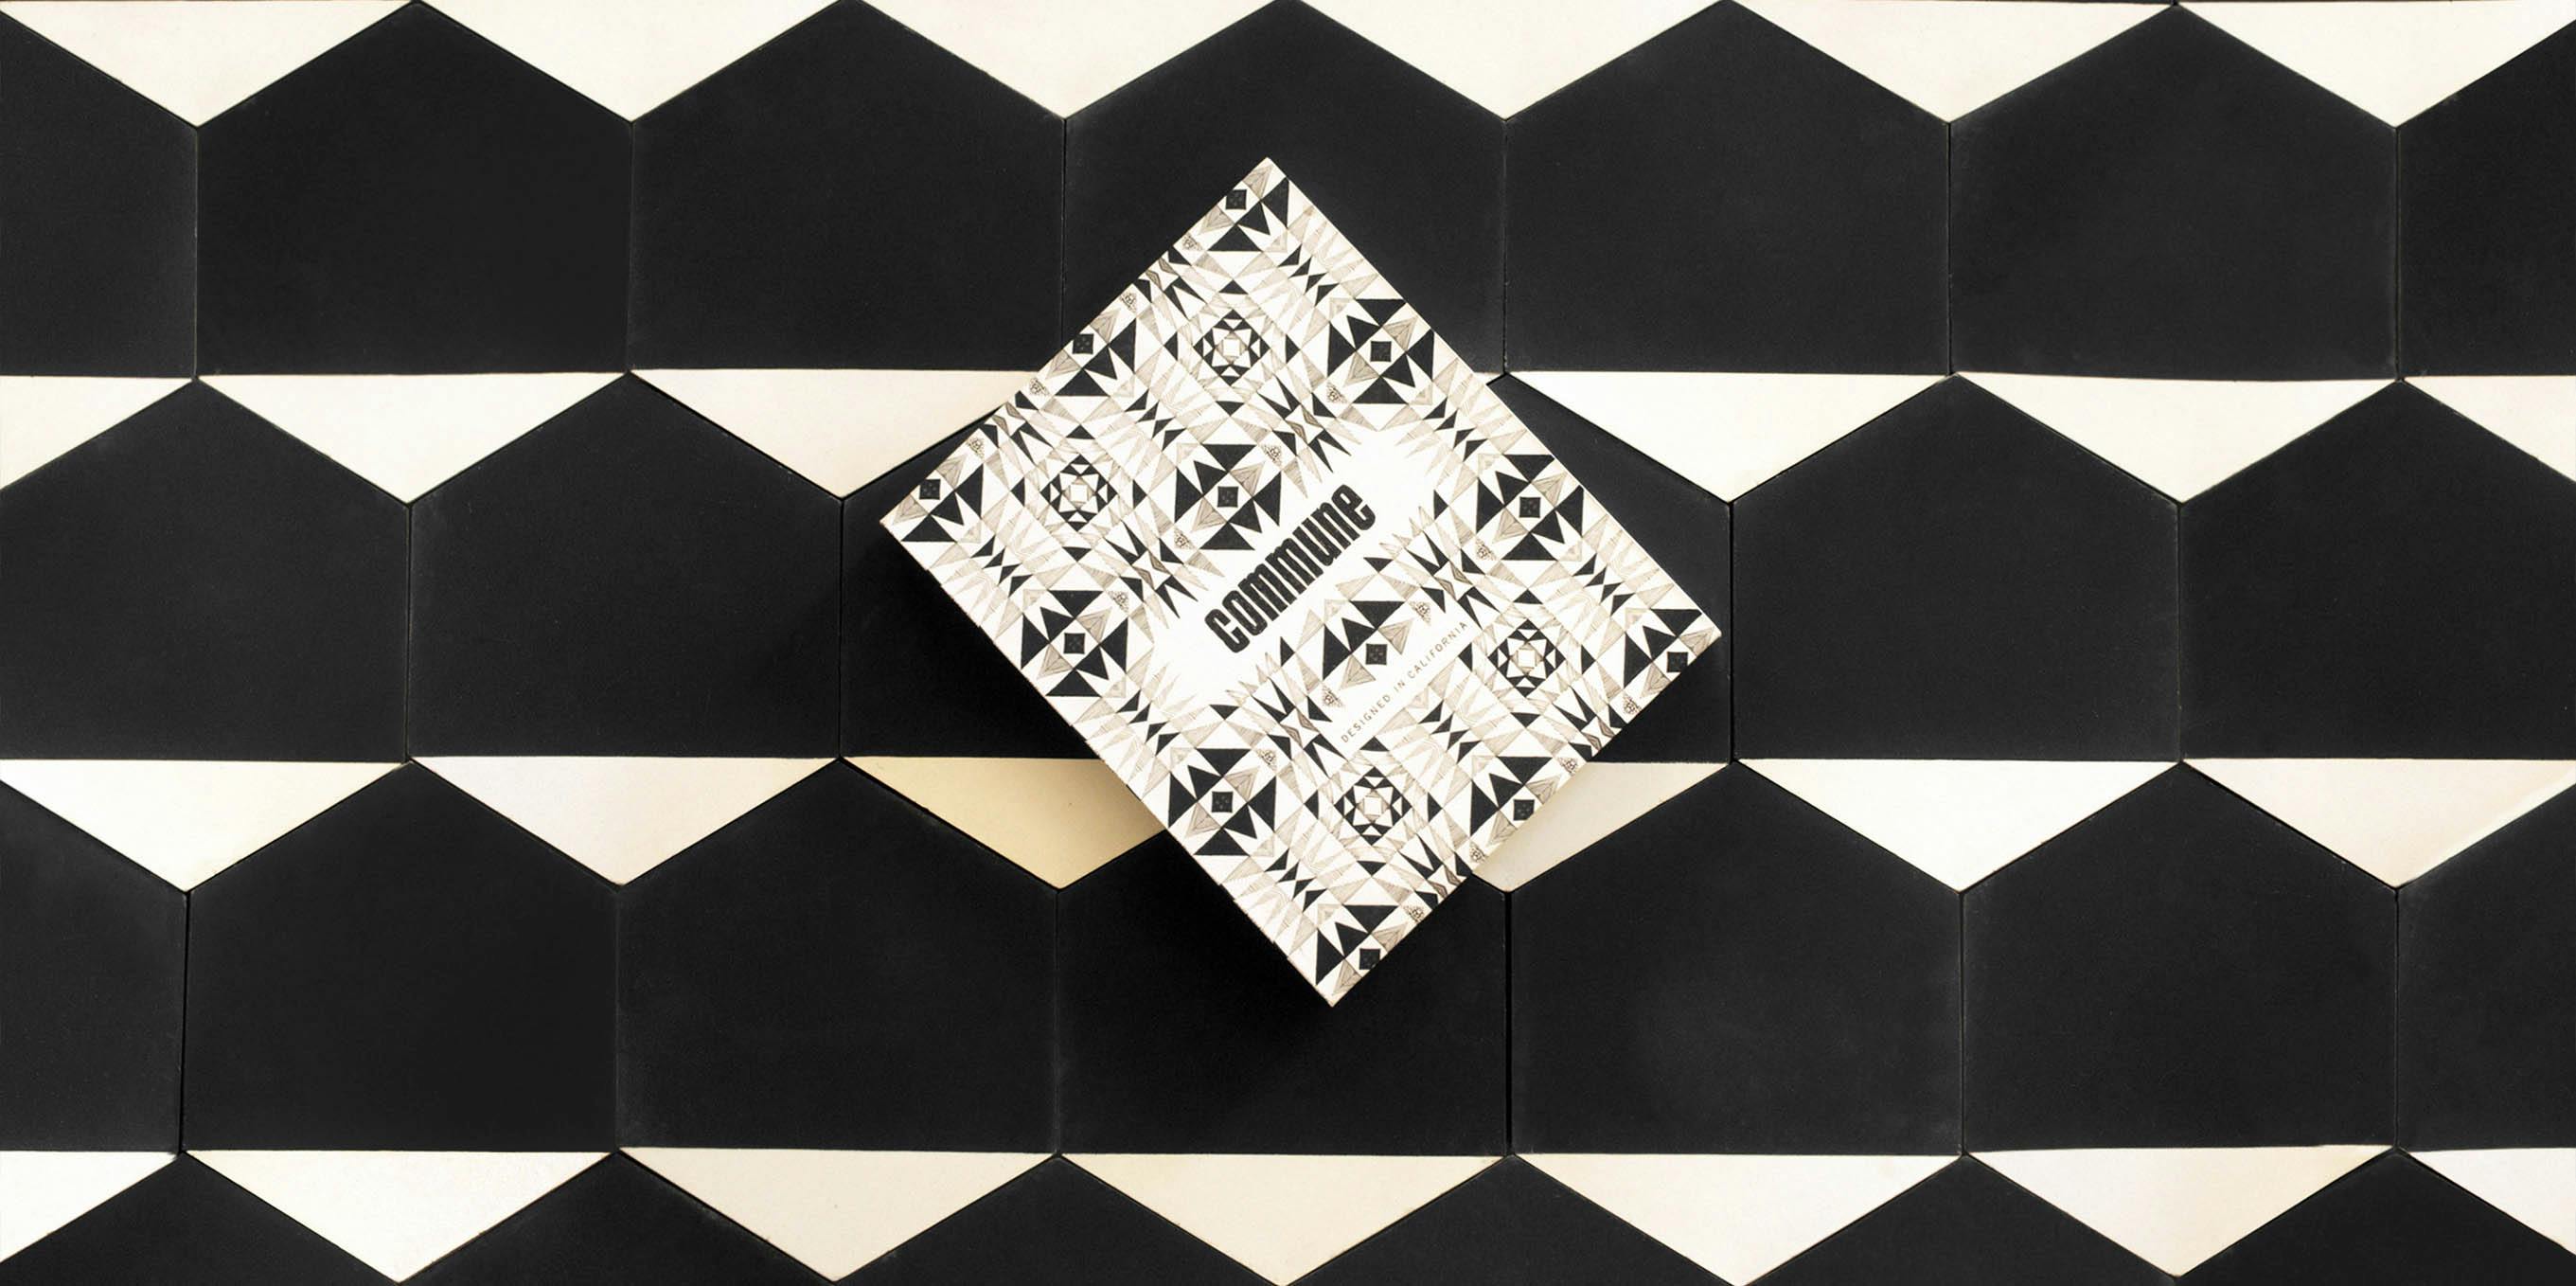 Cement Tile: Hex Patterned collection featured image.